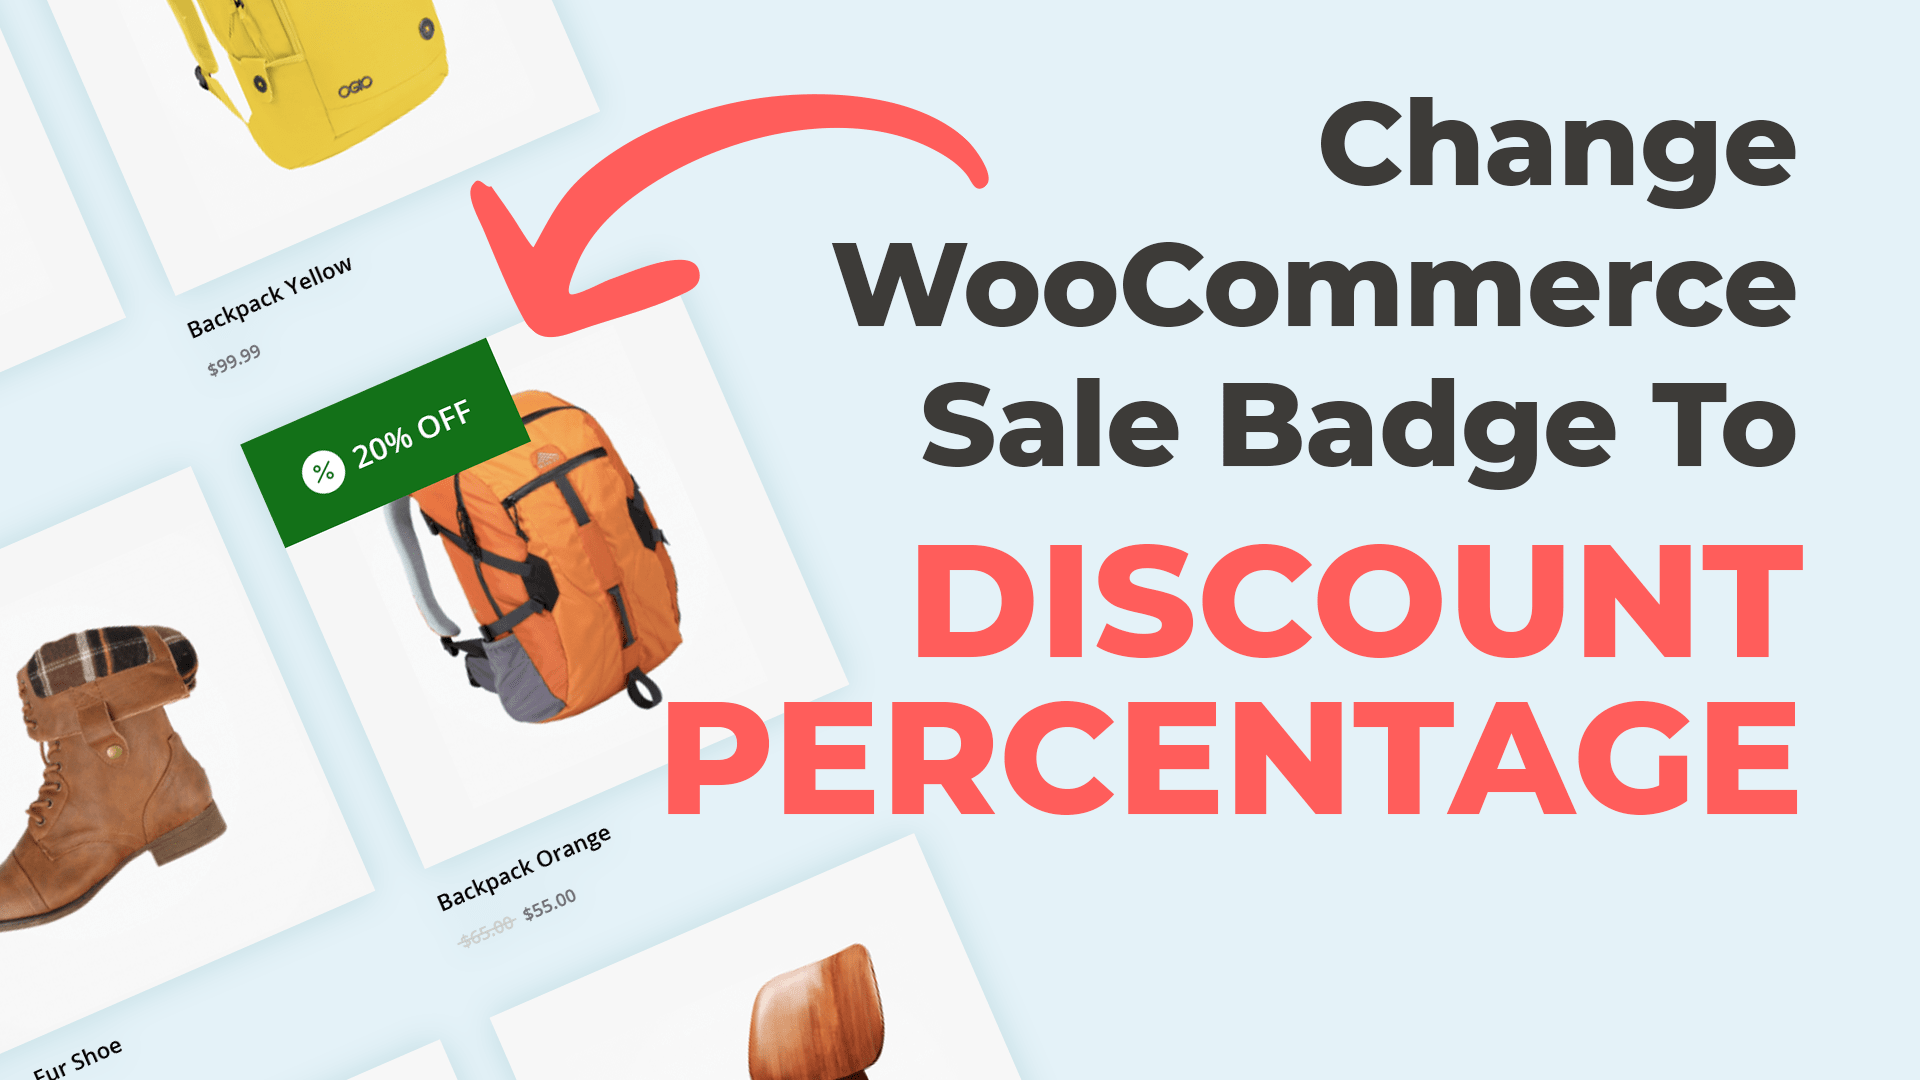 Change the WooCommerce Sale Badge to Display a Percentage Discount